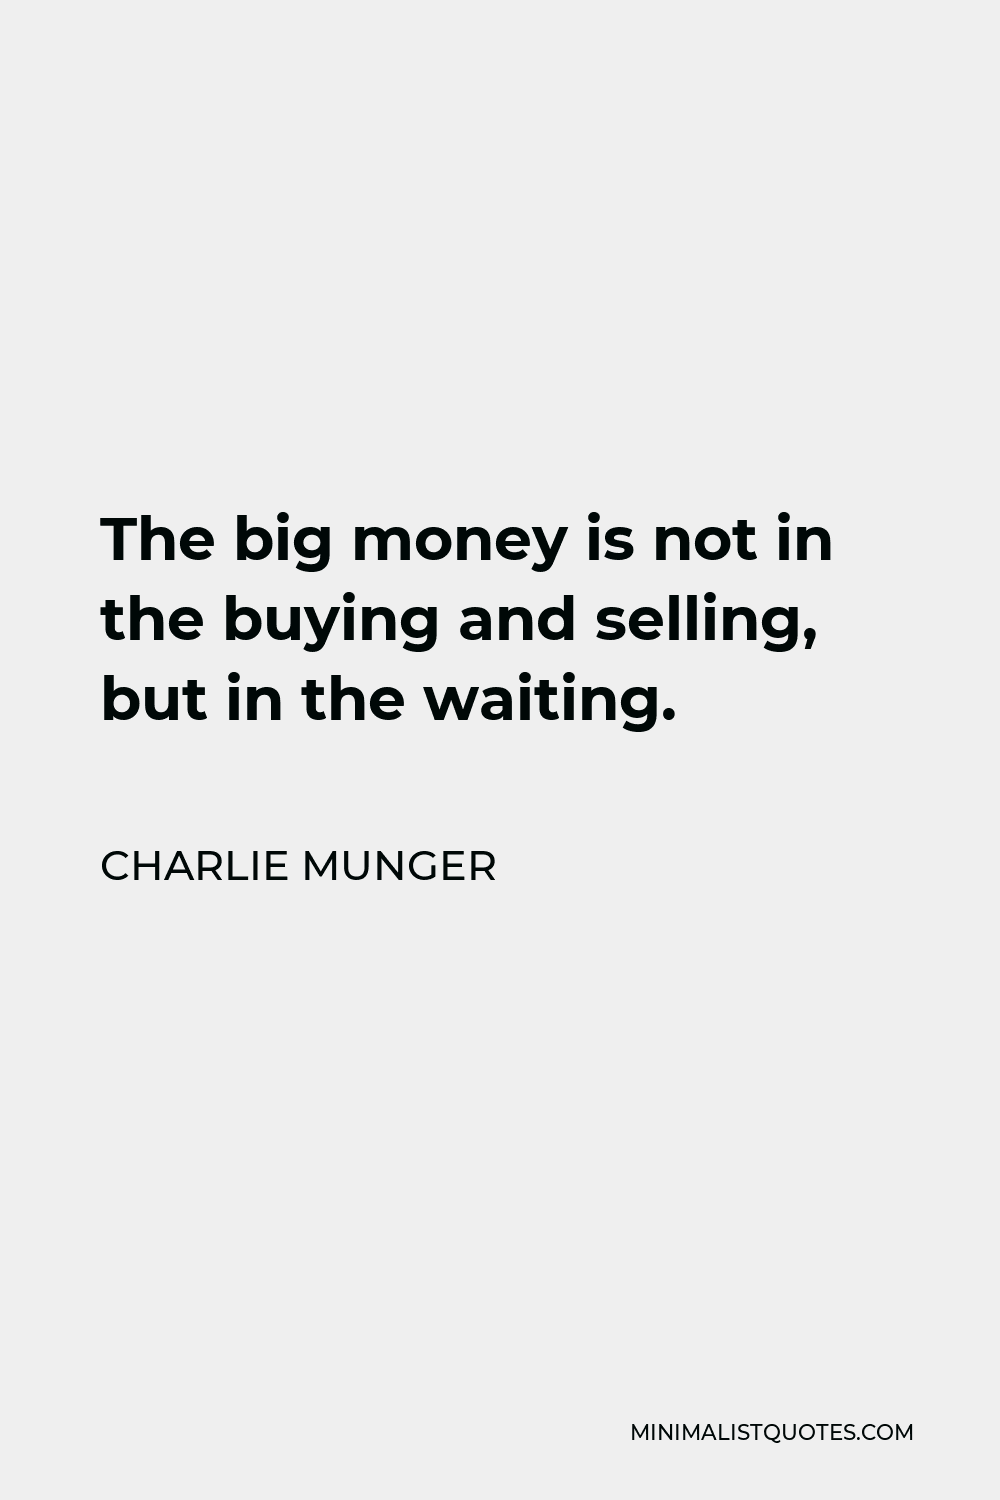 Charlie Munger Quote - The big money is not in the buying and selling, but in the waiting.